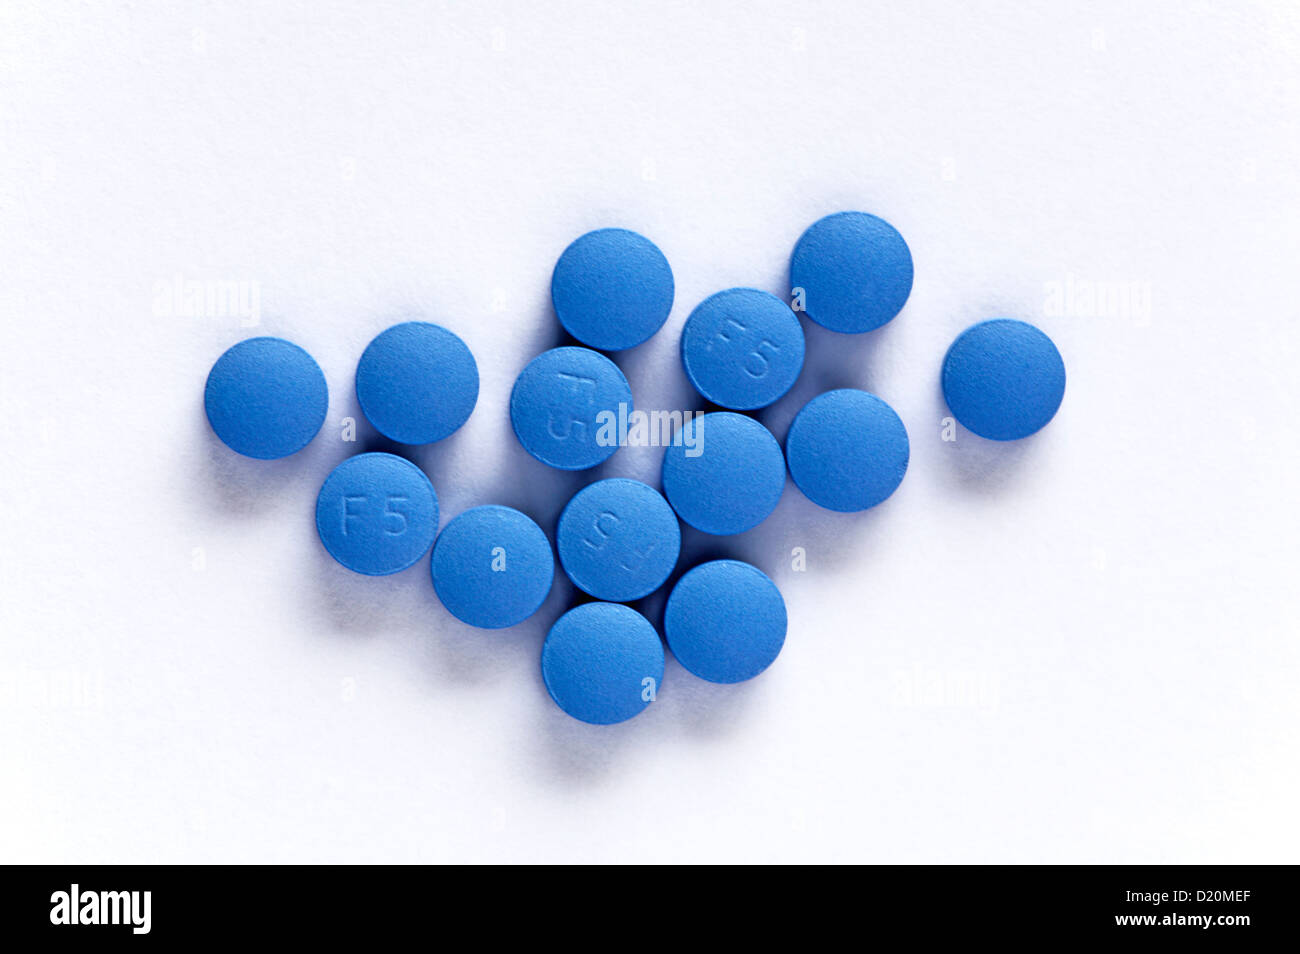 Finasteride tablets used in the treatment and control of benign enlargement of the prostate in men. Stock Photo